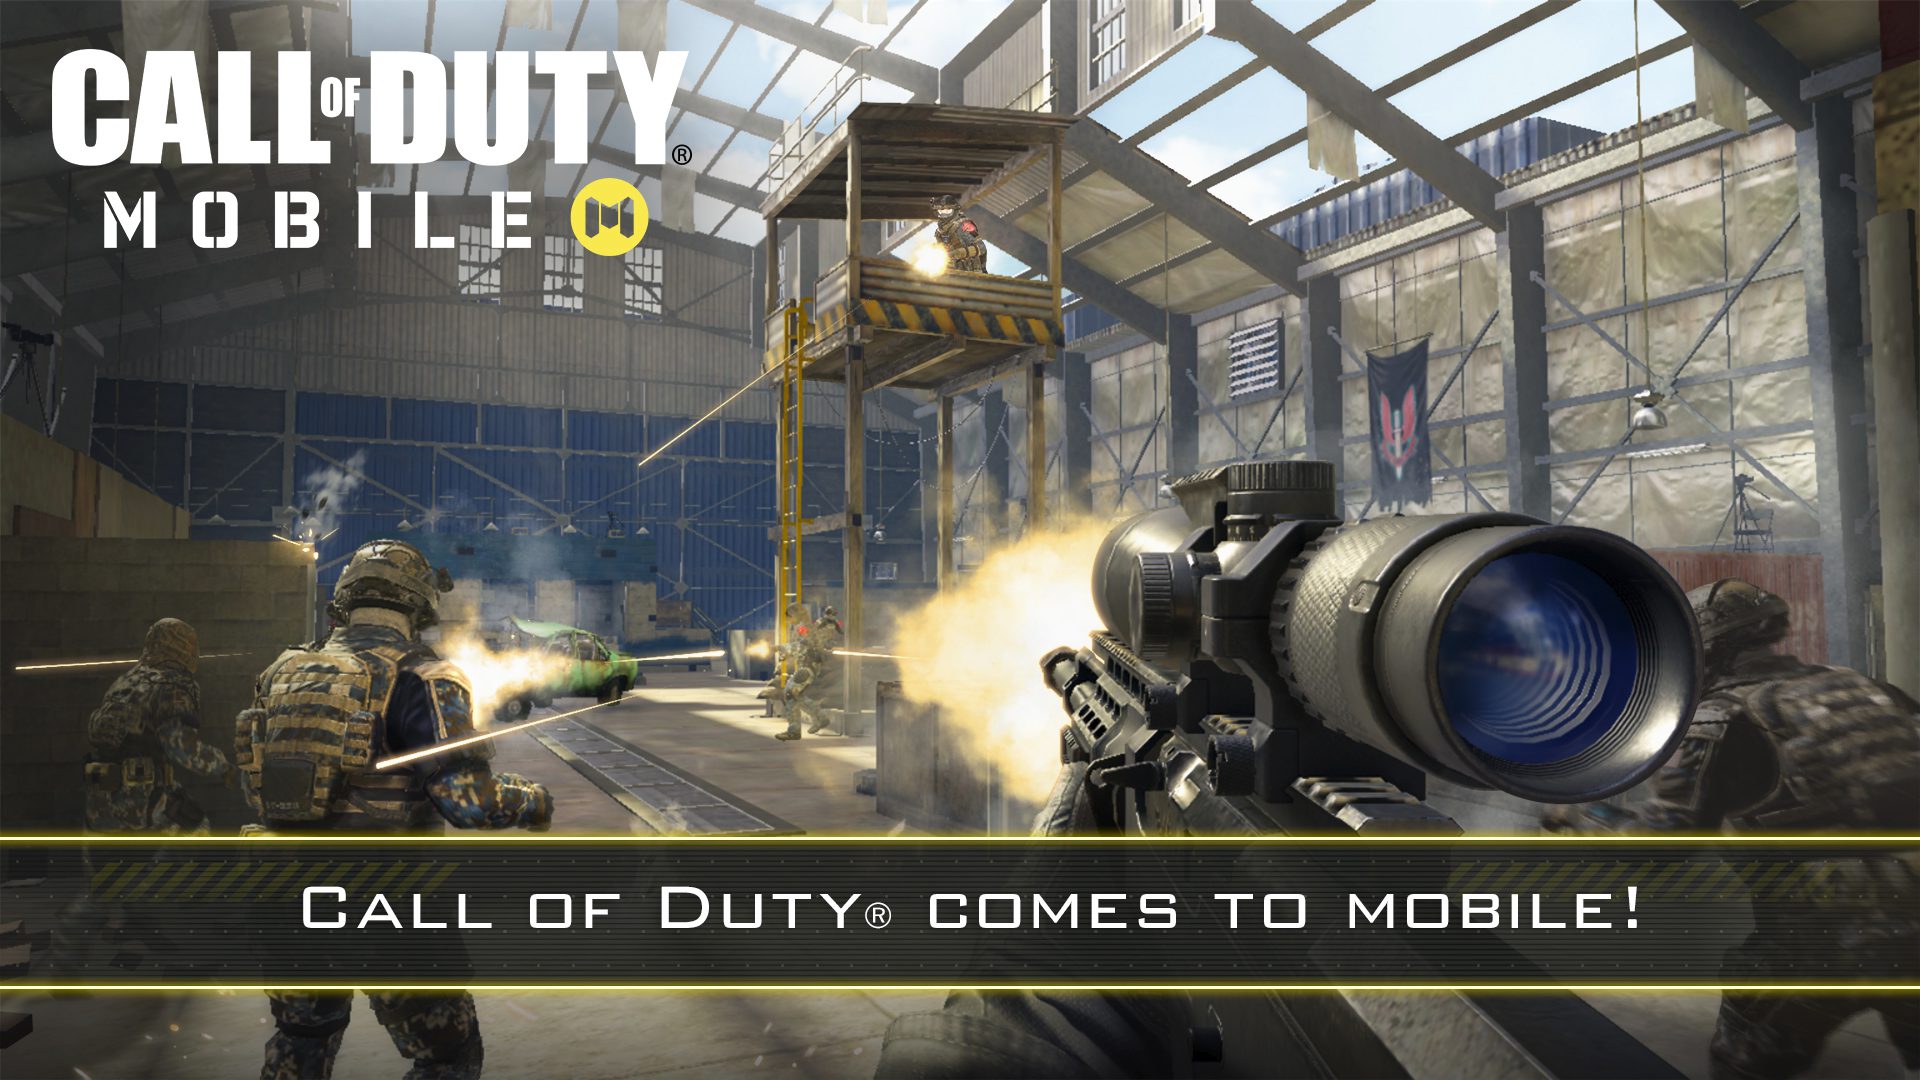 Free-to-Play Call of Duty Mobile Announced